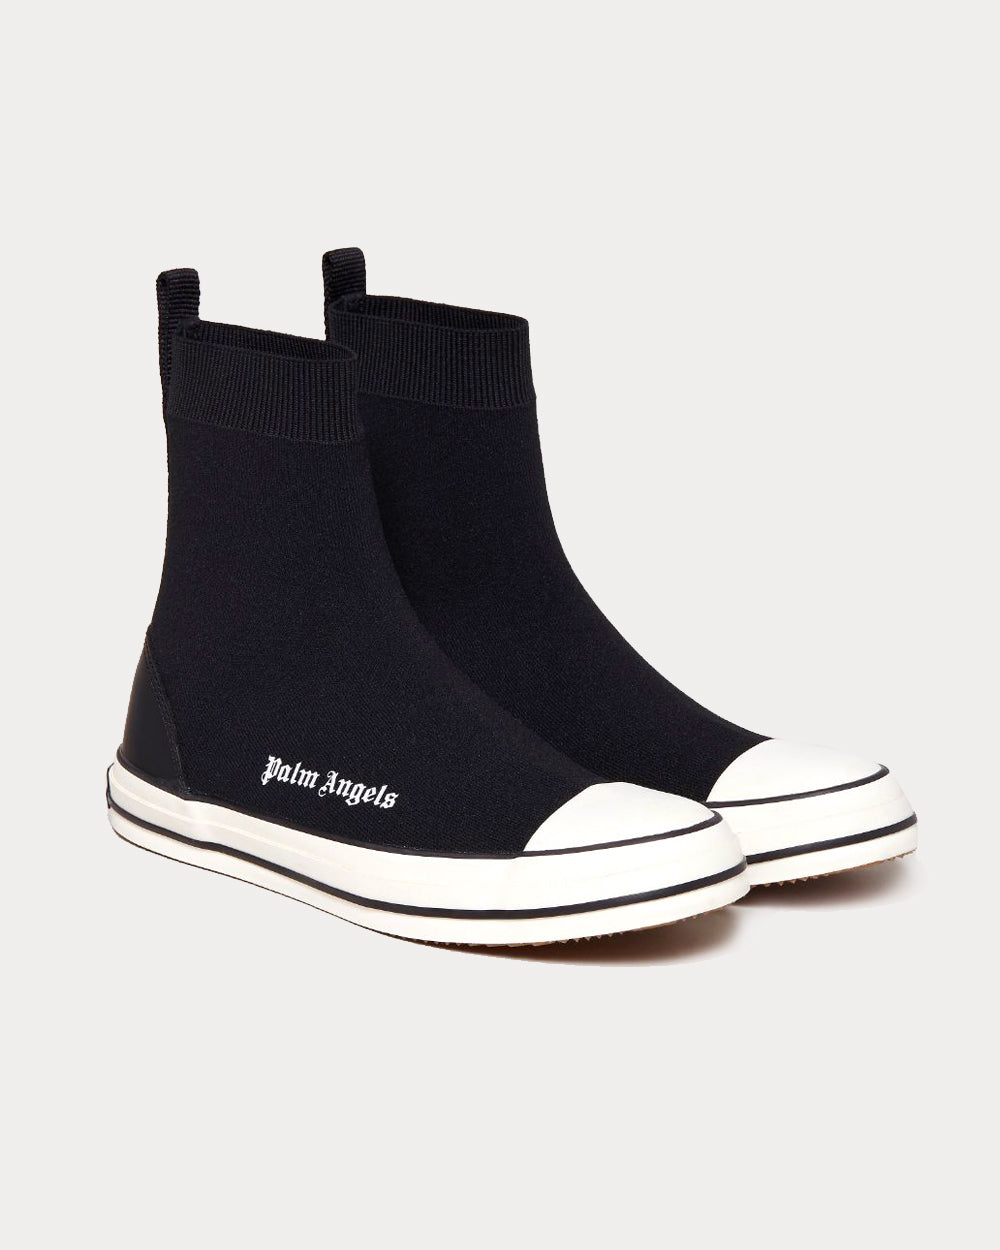 Palm Angels - Vulcanized Black / White High Top Sneakers